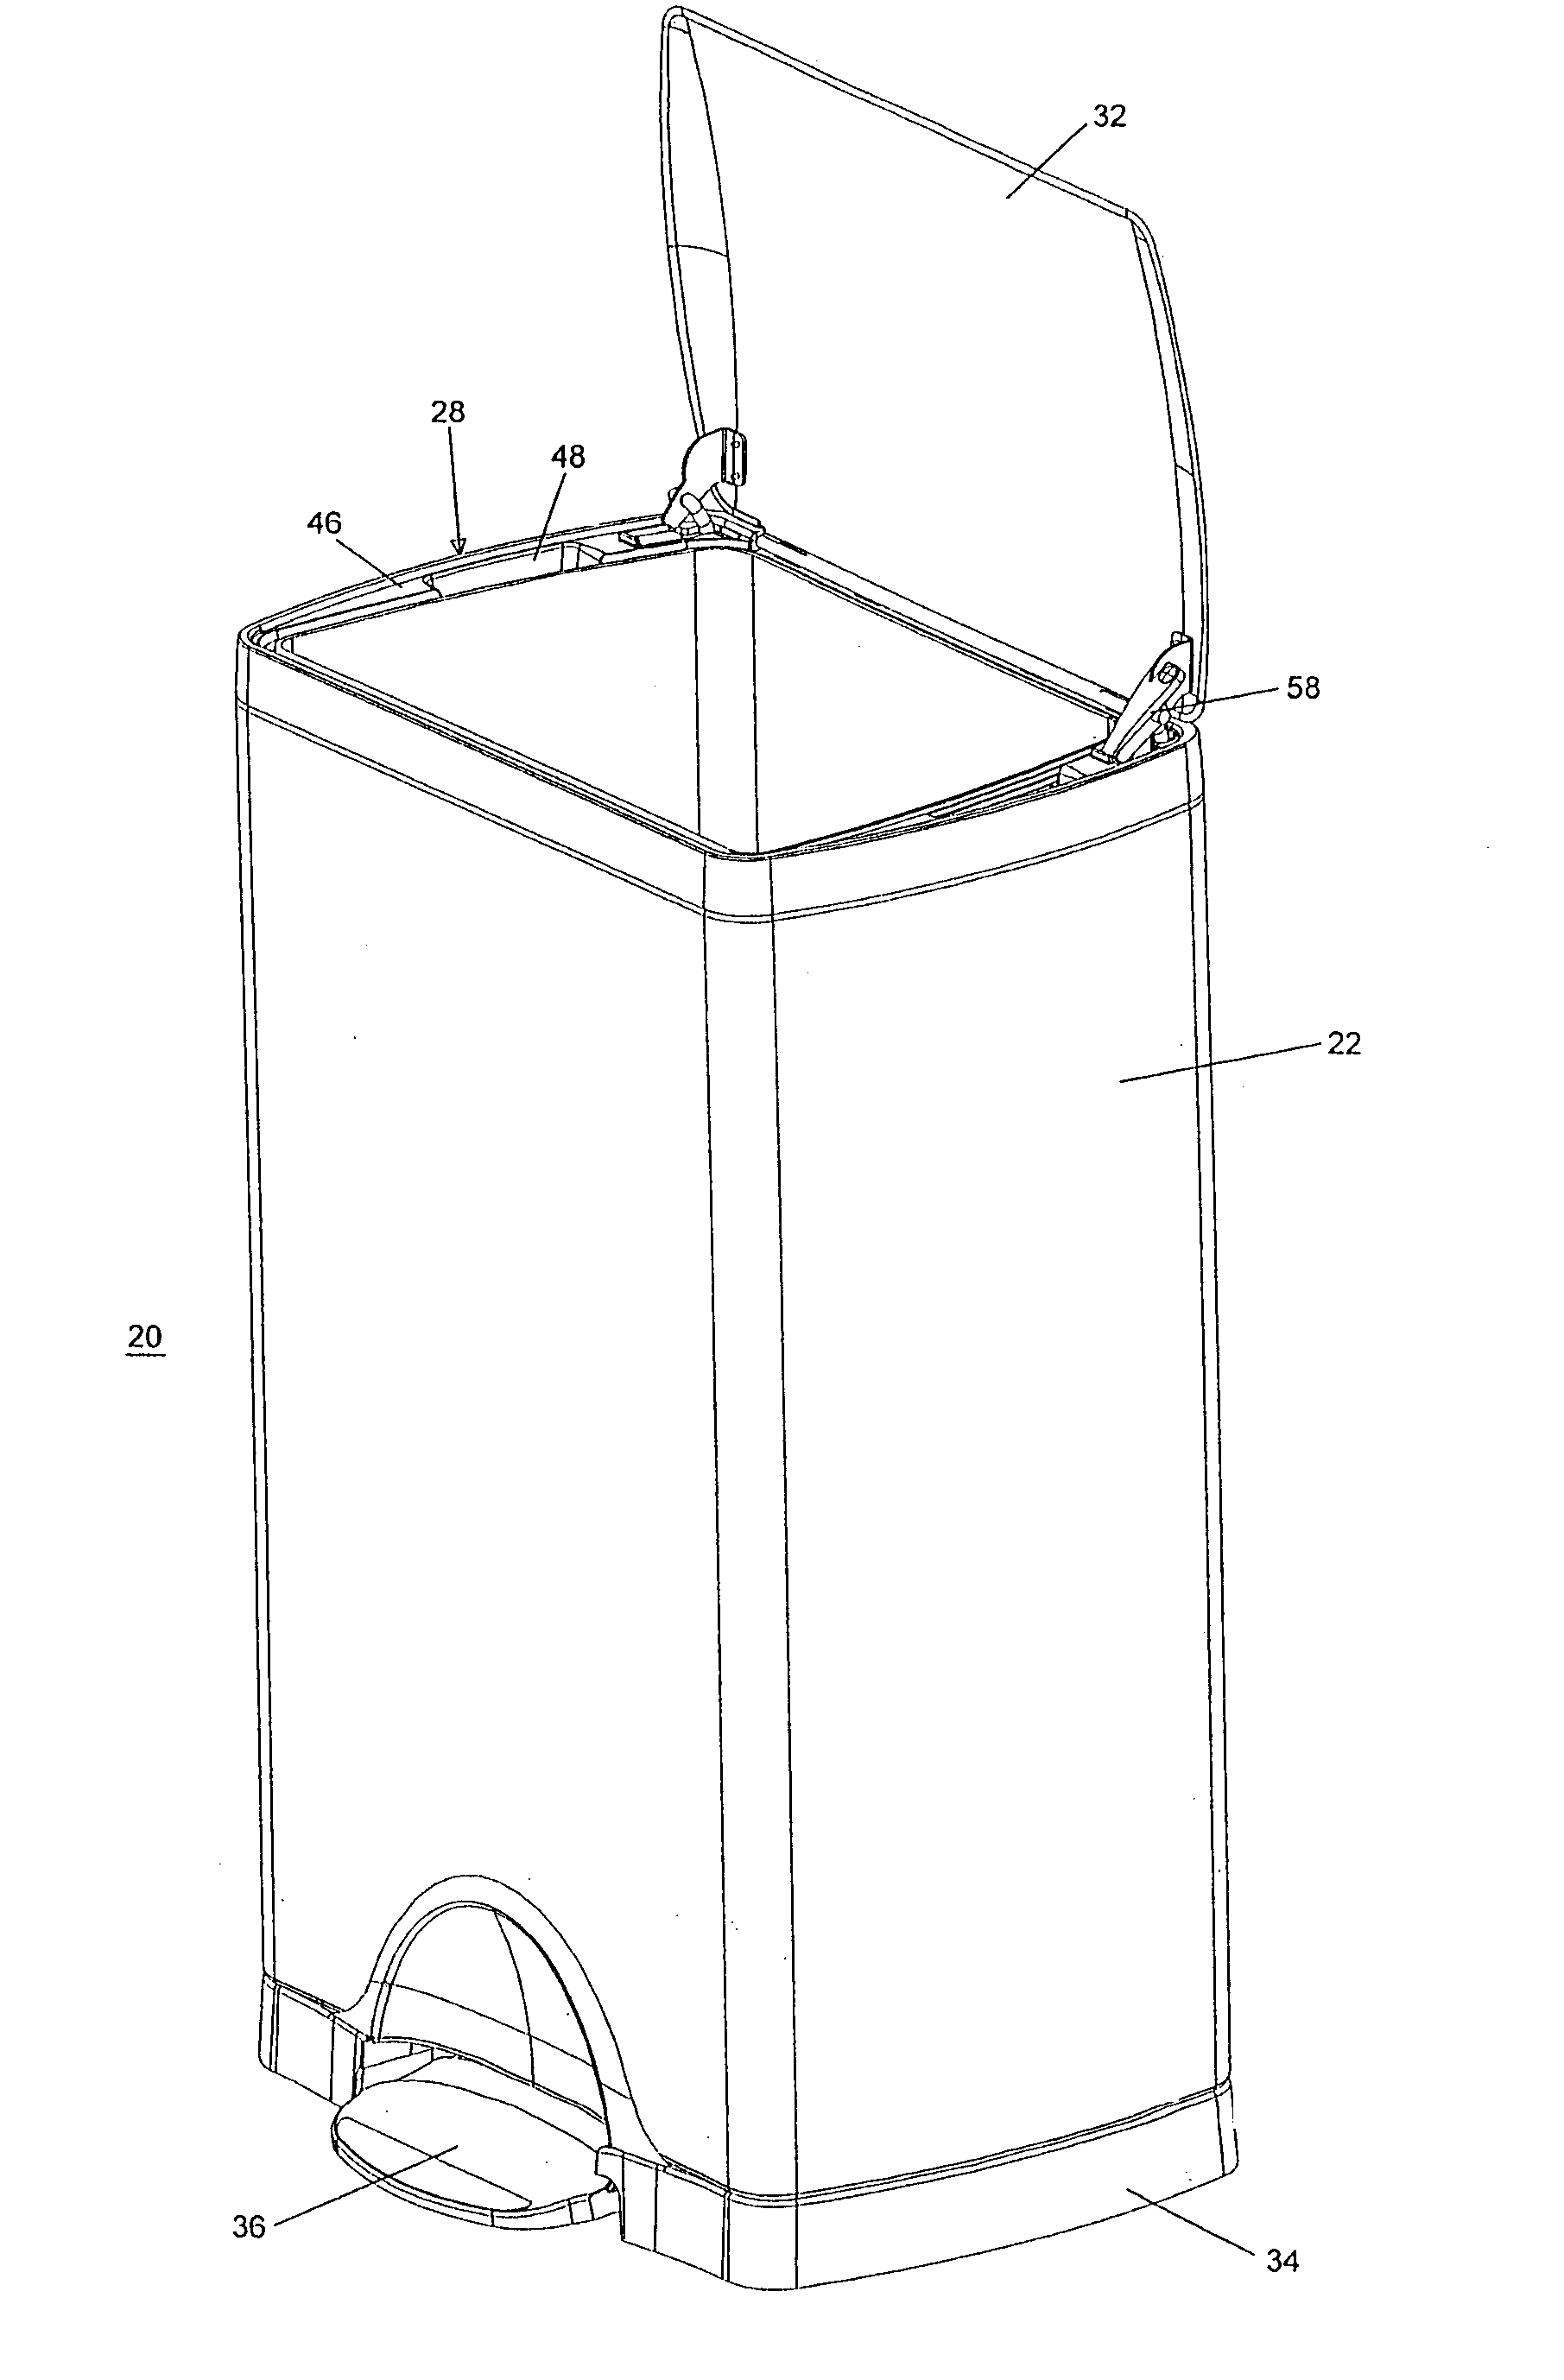 Trash can assembly with locking lid